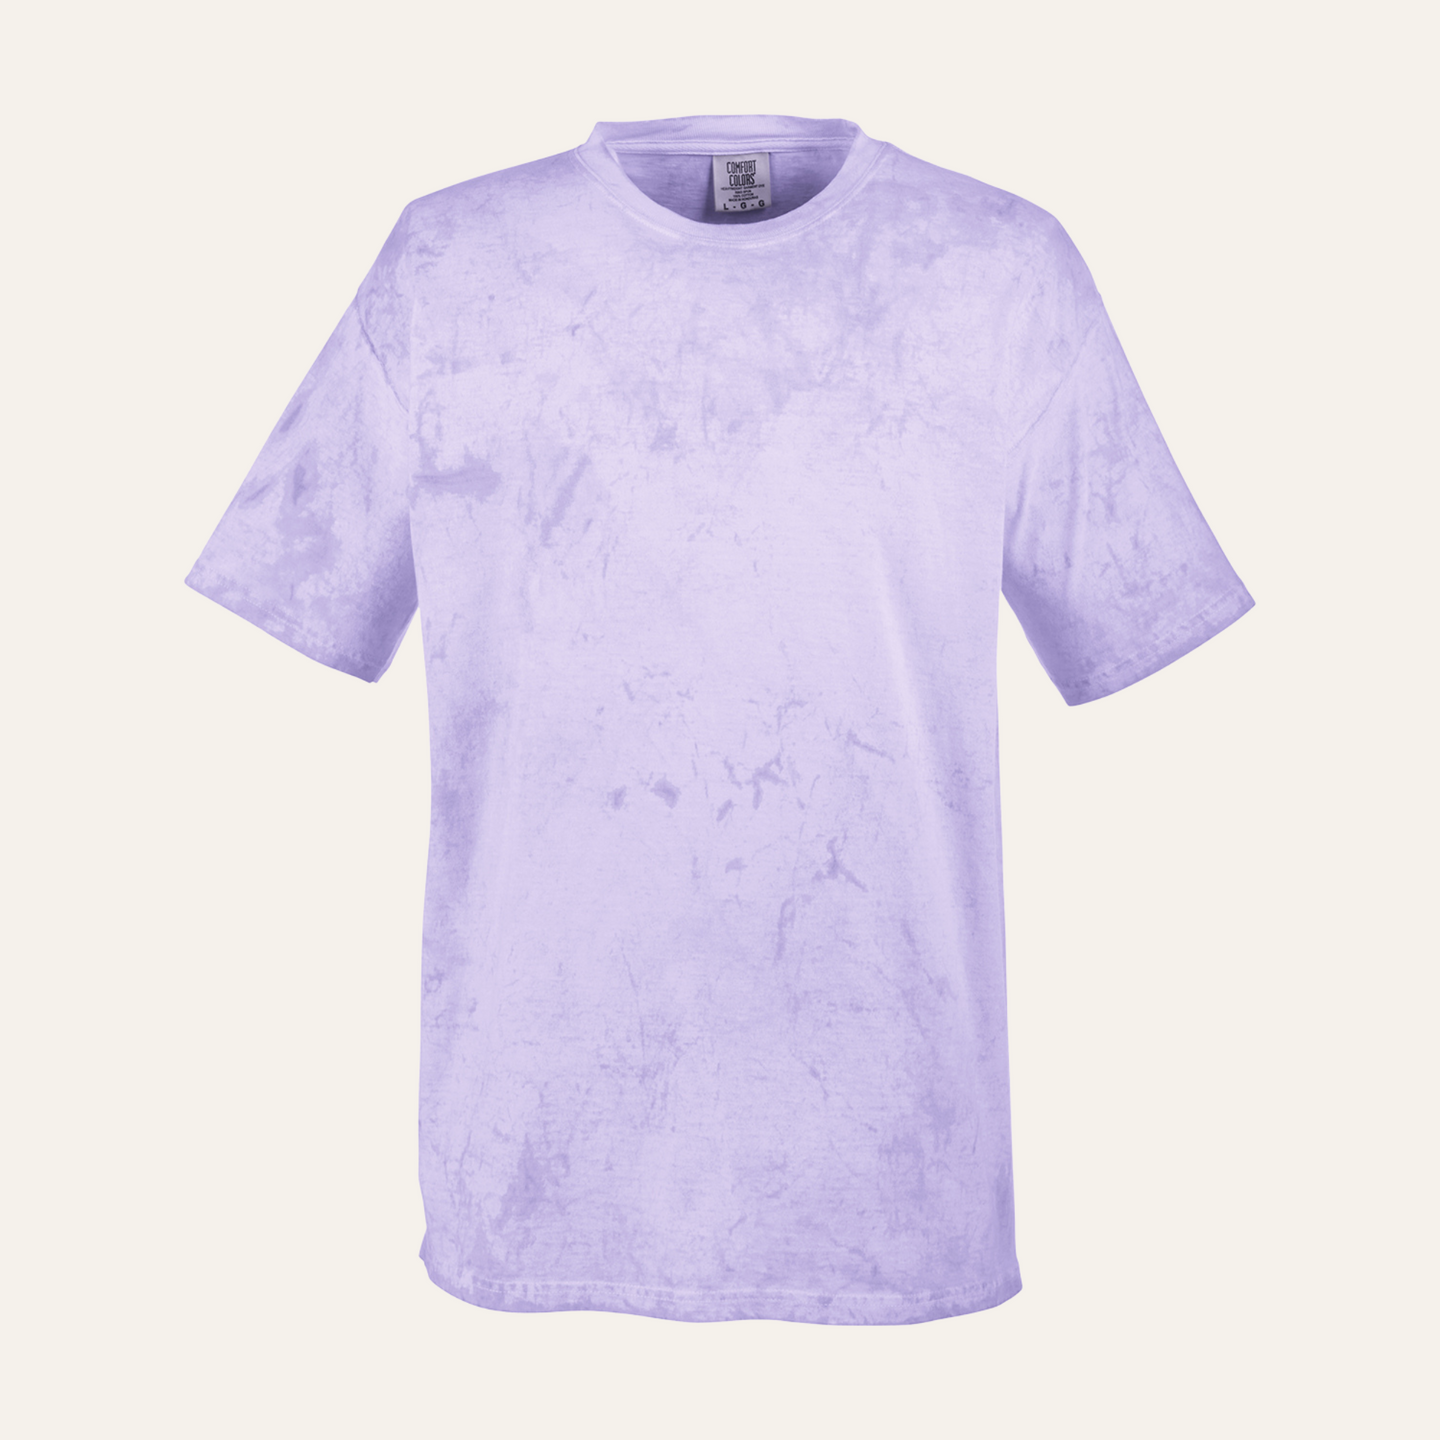 YHLQMDLG Tie Dye Embroidered T-shirt